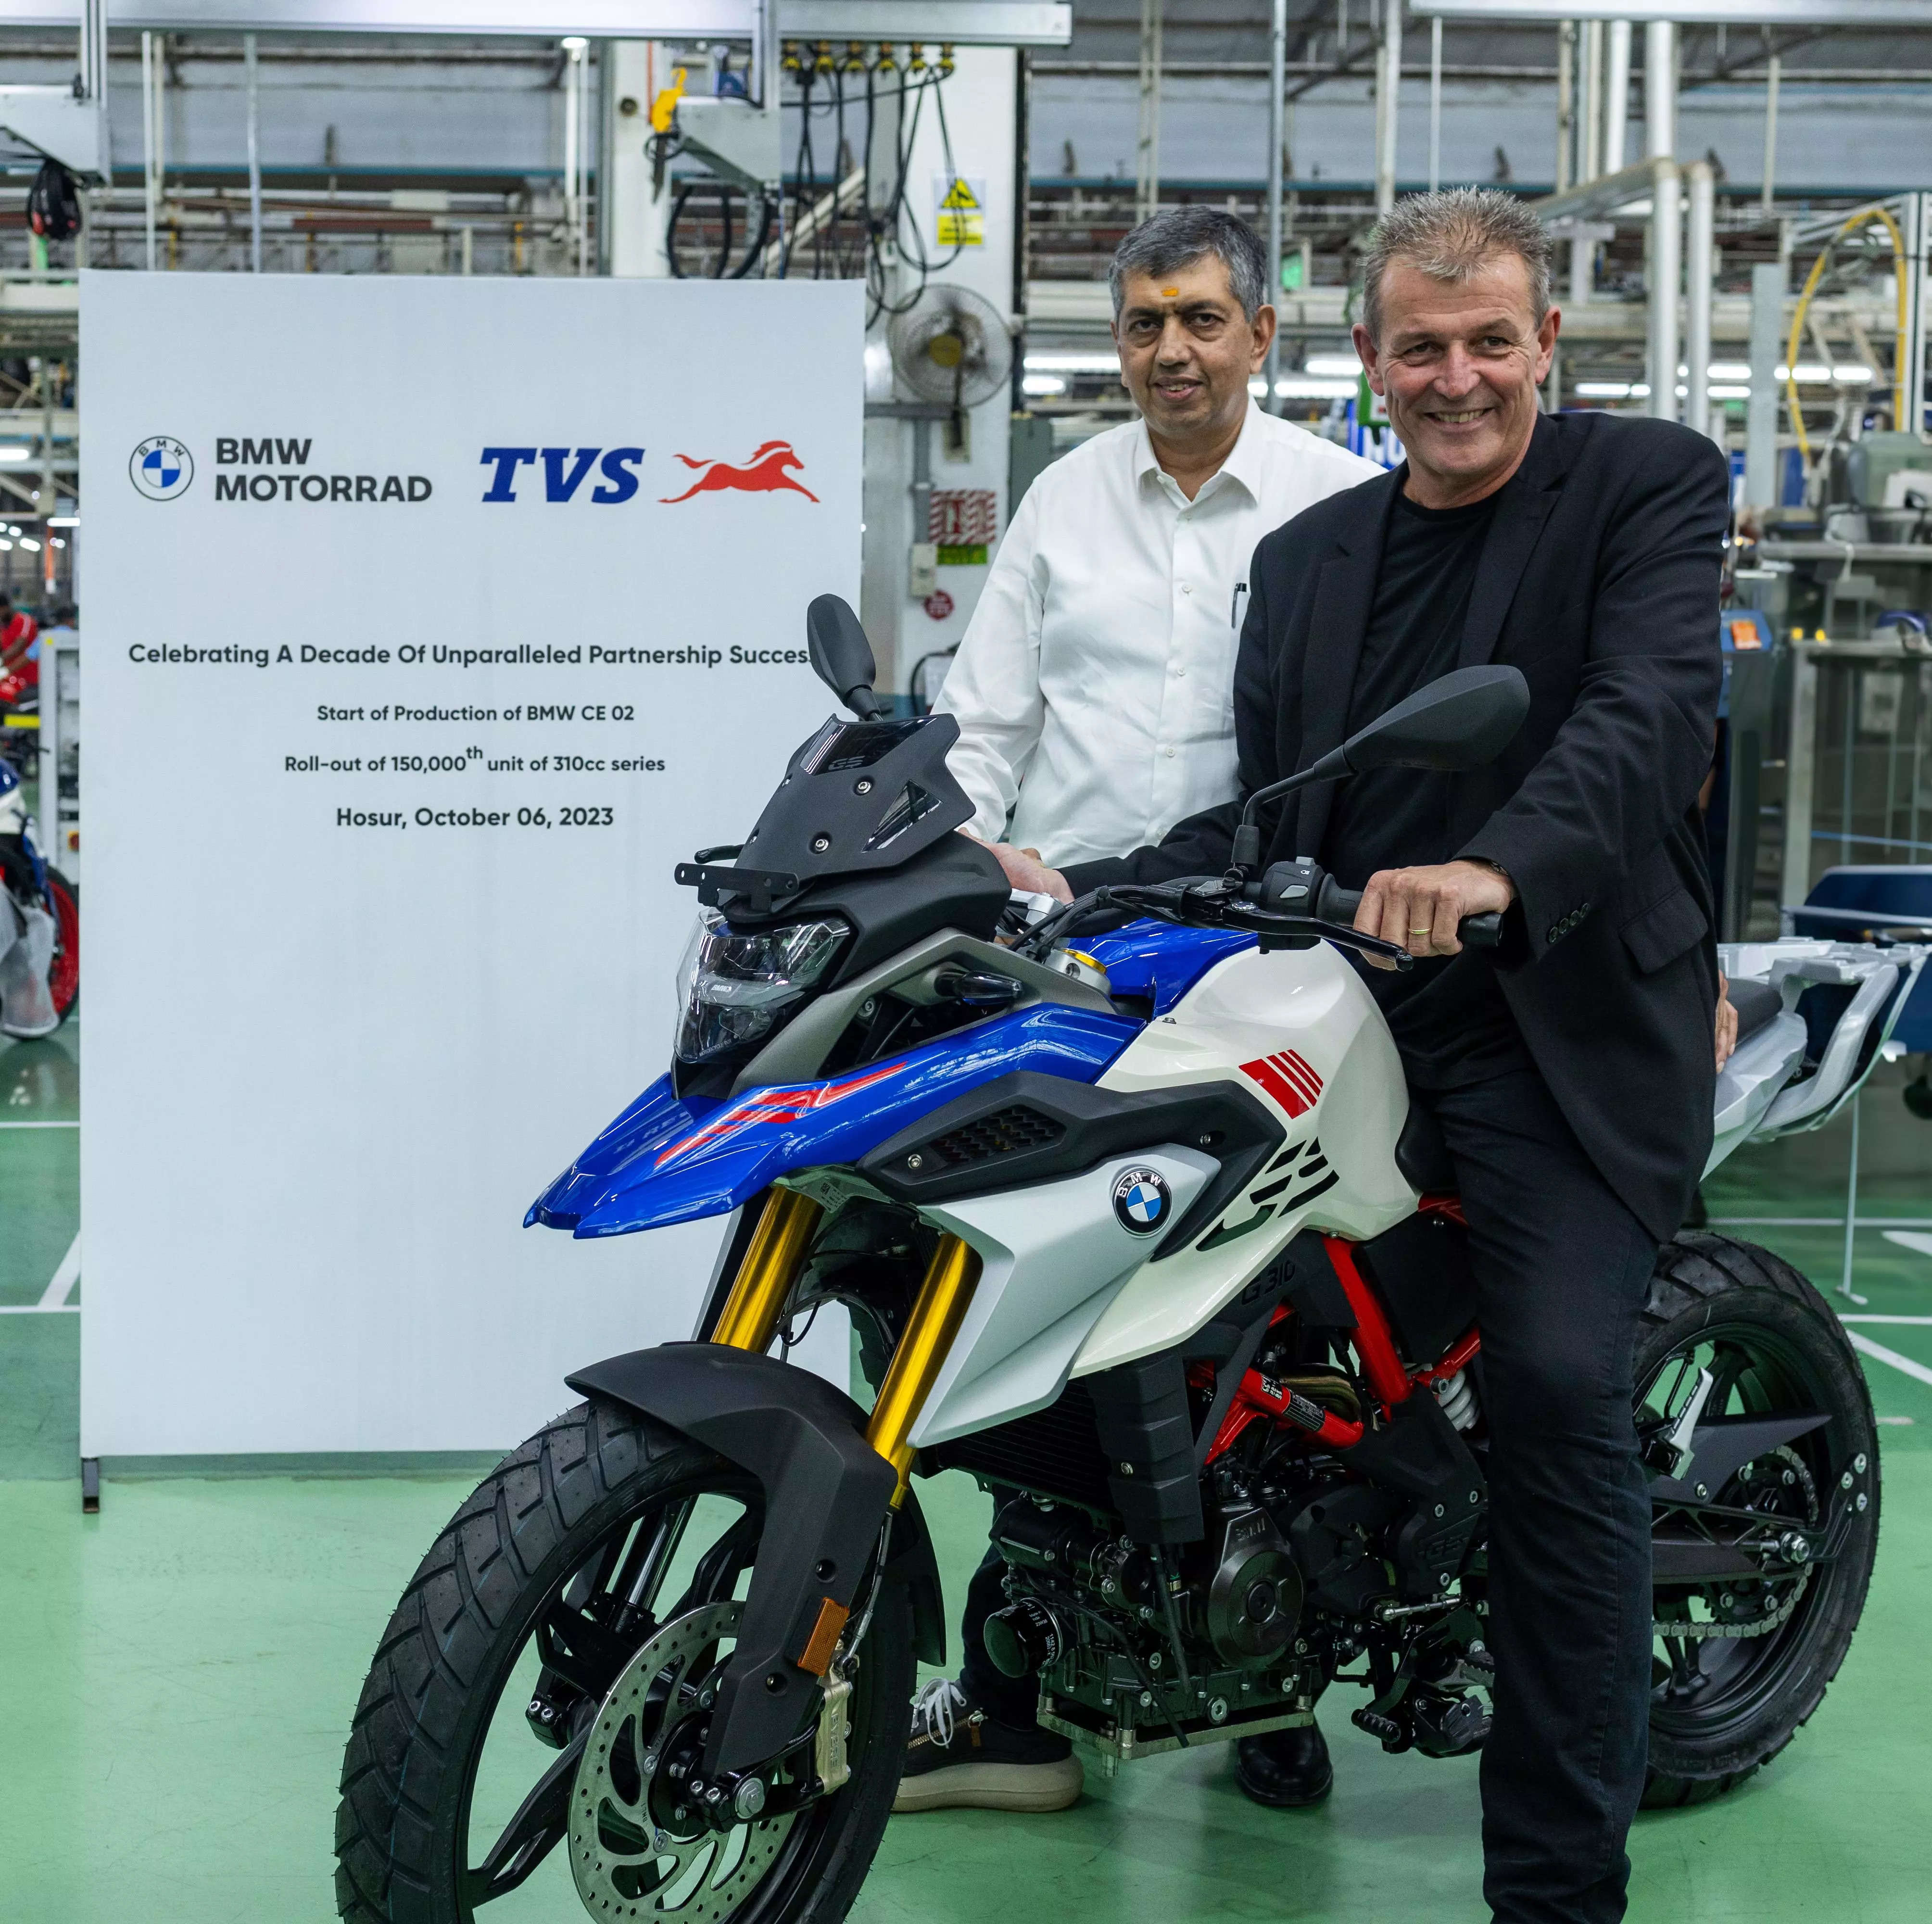 BMW Motorrad TVS Motor Low Volt EV: Why BMW ups its bets on TVS Motor  Partnership, and India, ET Auto